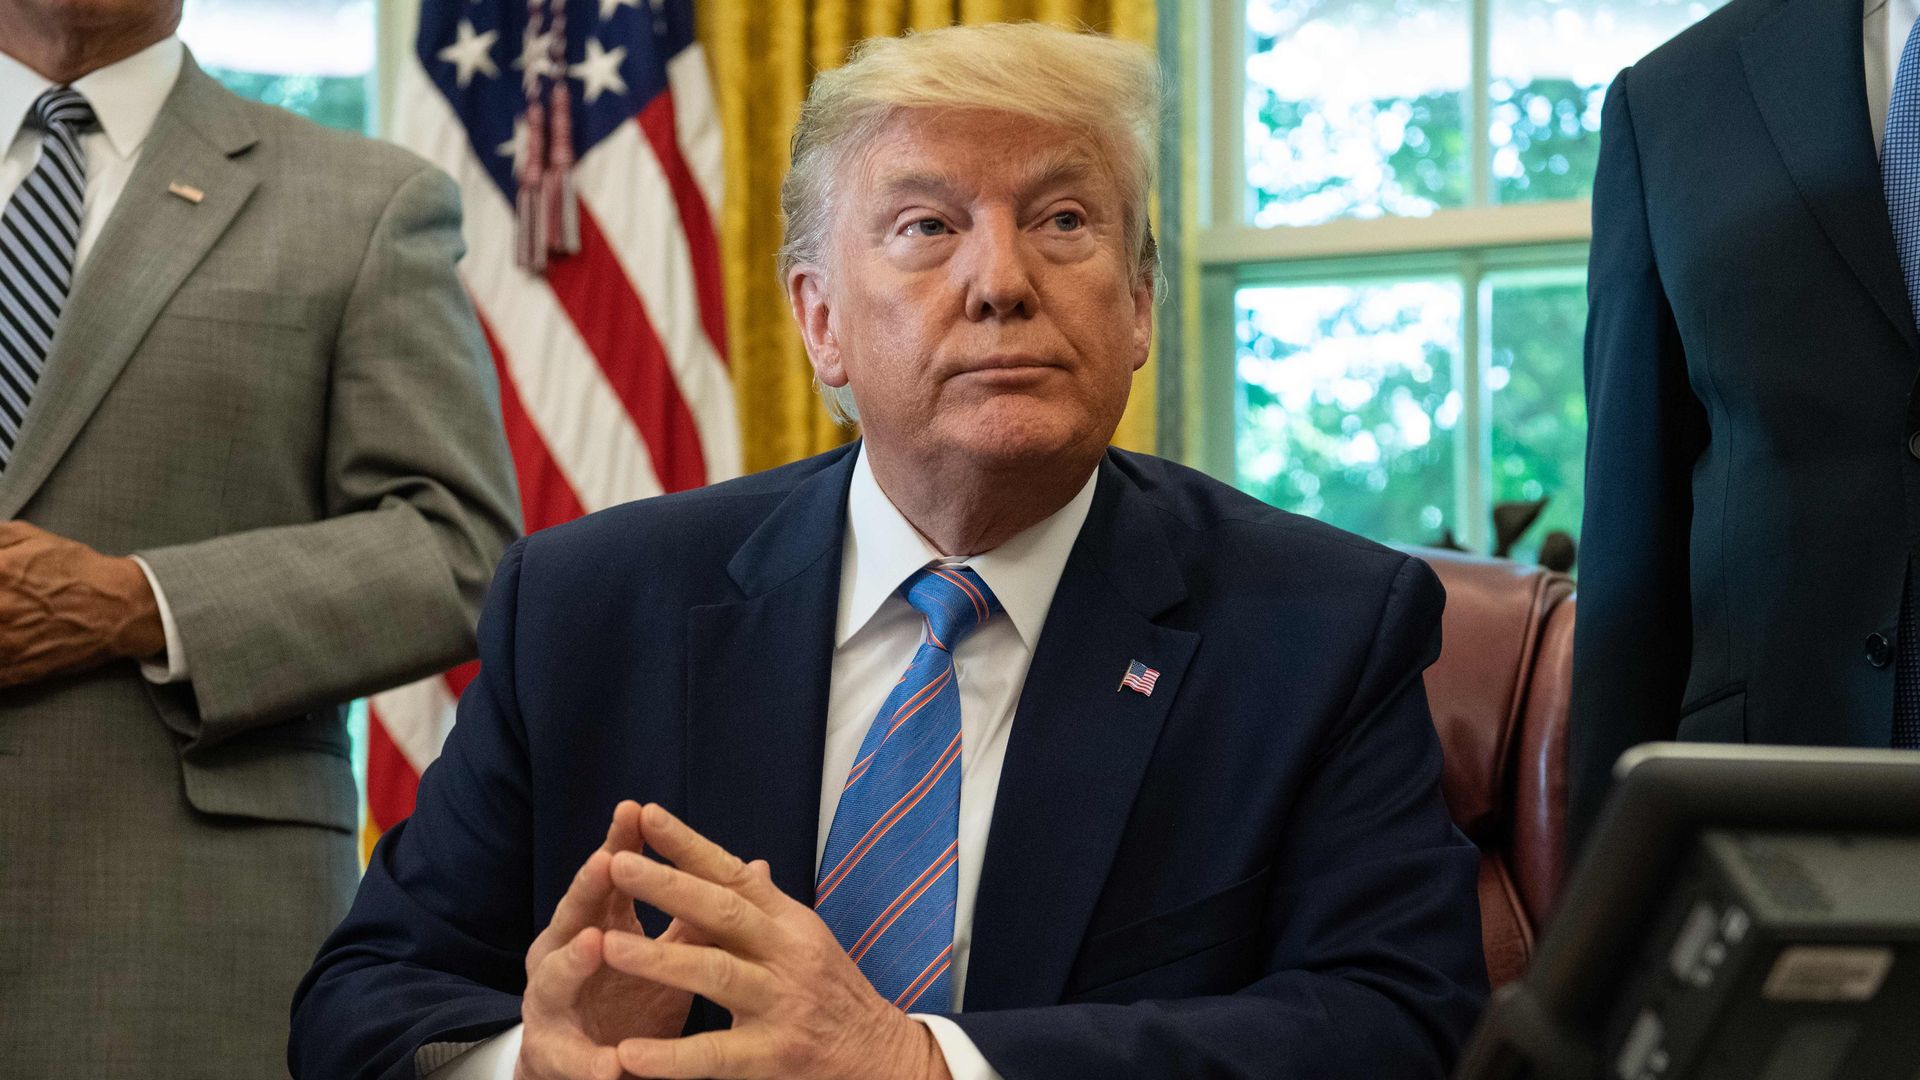 President Donald Trump speaks to the press before signing a bill for border funding legislationin in the Oval Office at the White House in Washington, DC, on July 1, 2019.